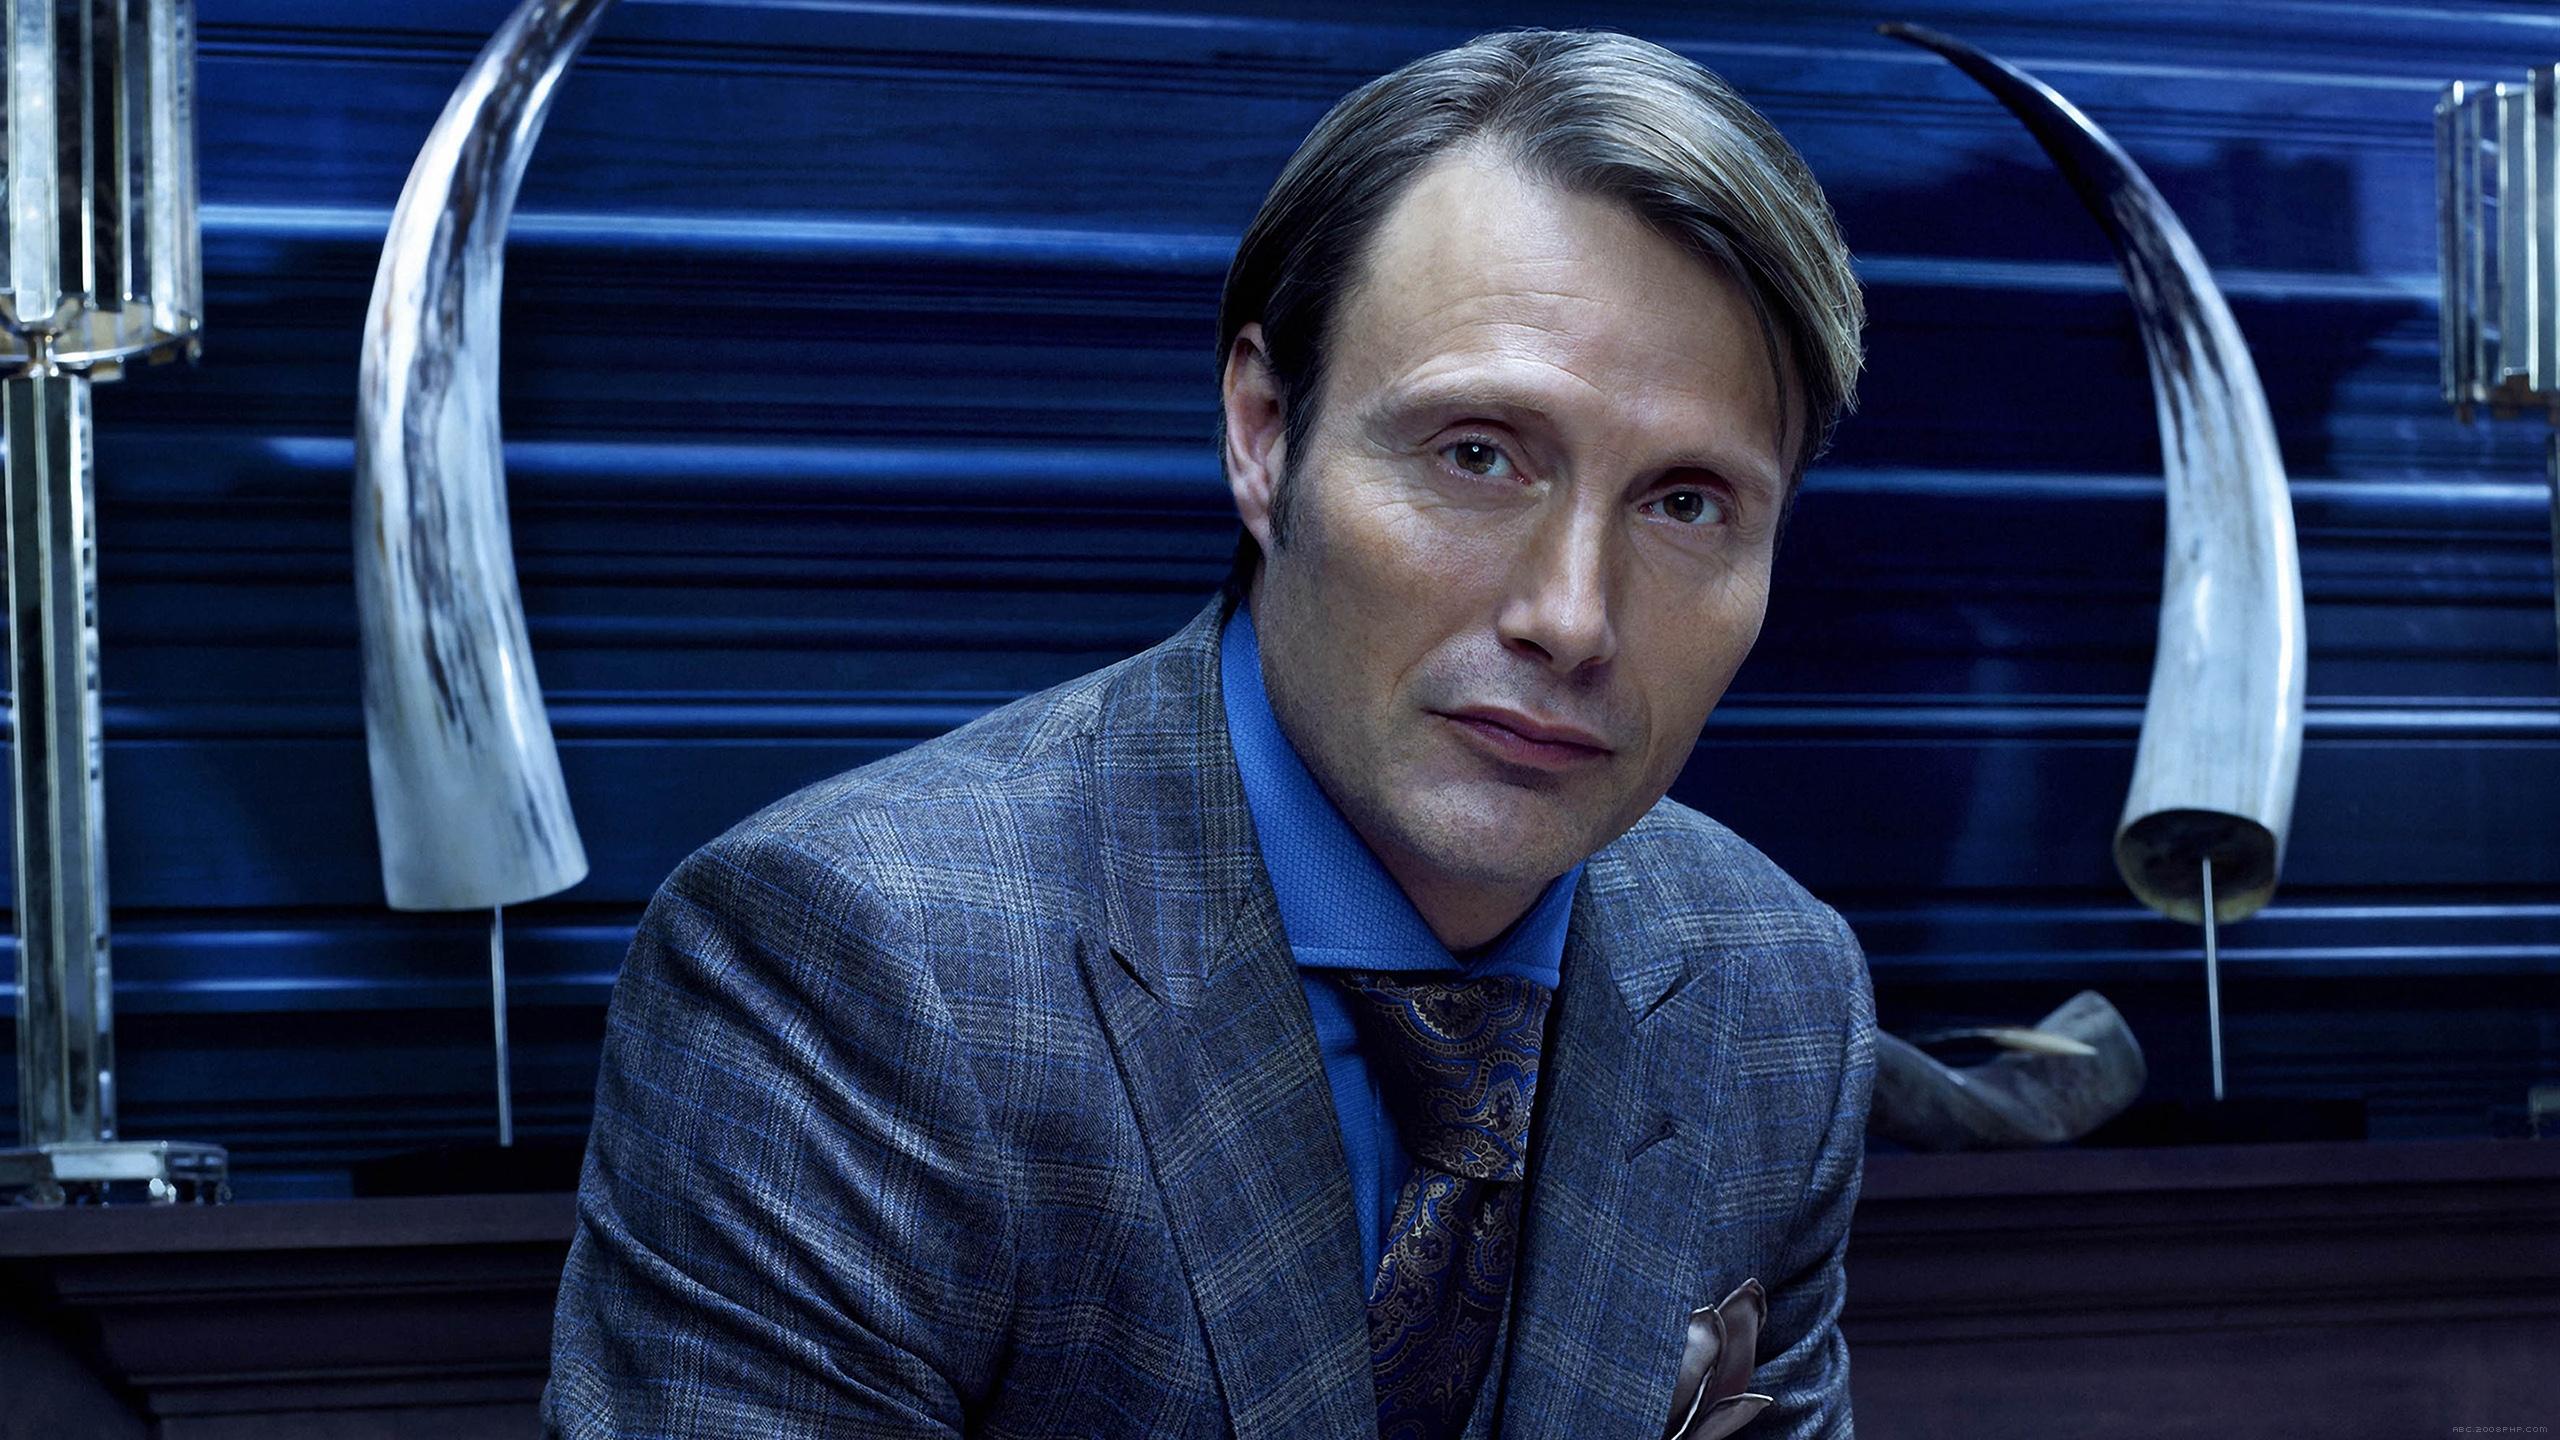 NBC’s ‘Hannibal’ Trailer Ups the Gore for International Audiences